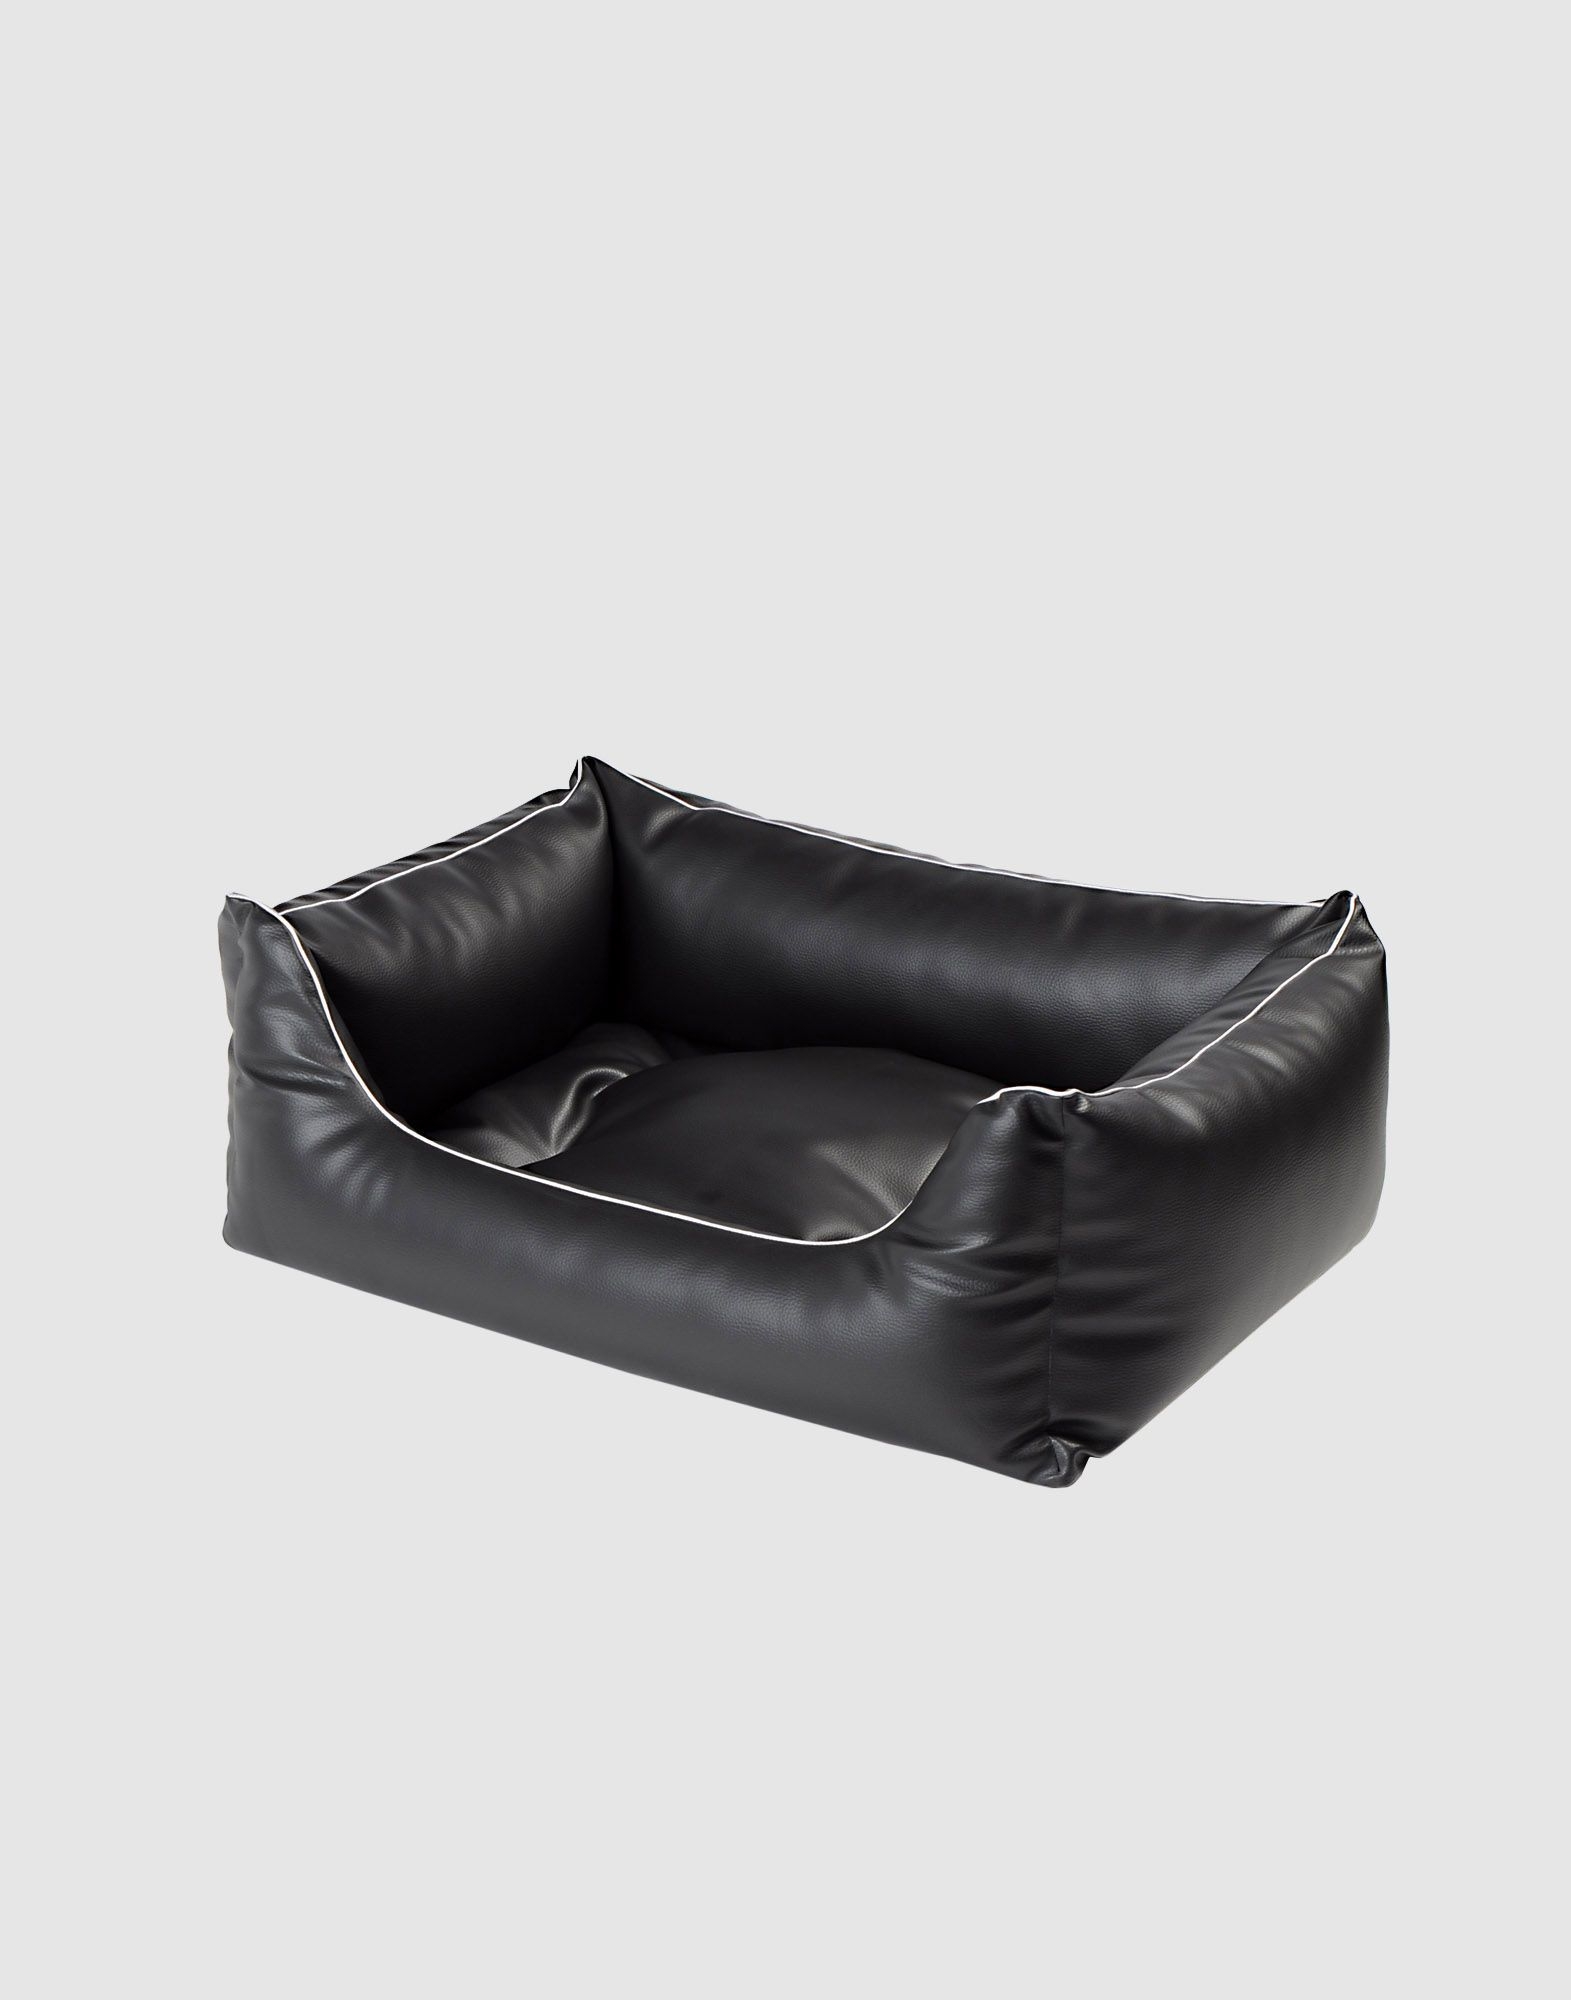 Leather dog bed